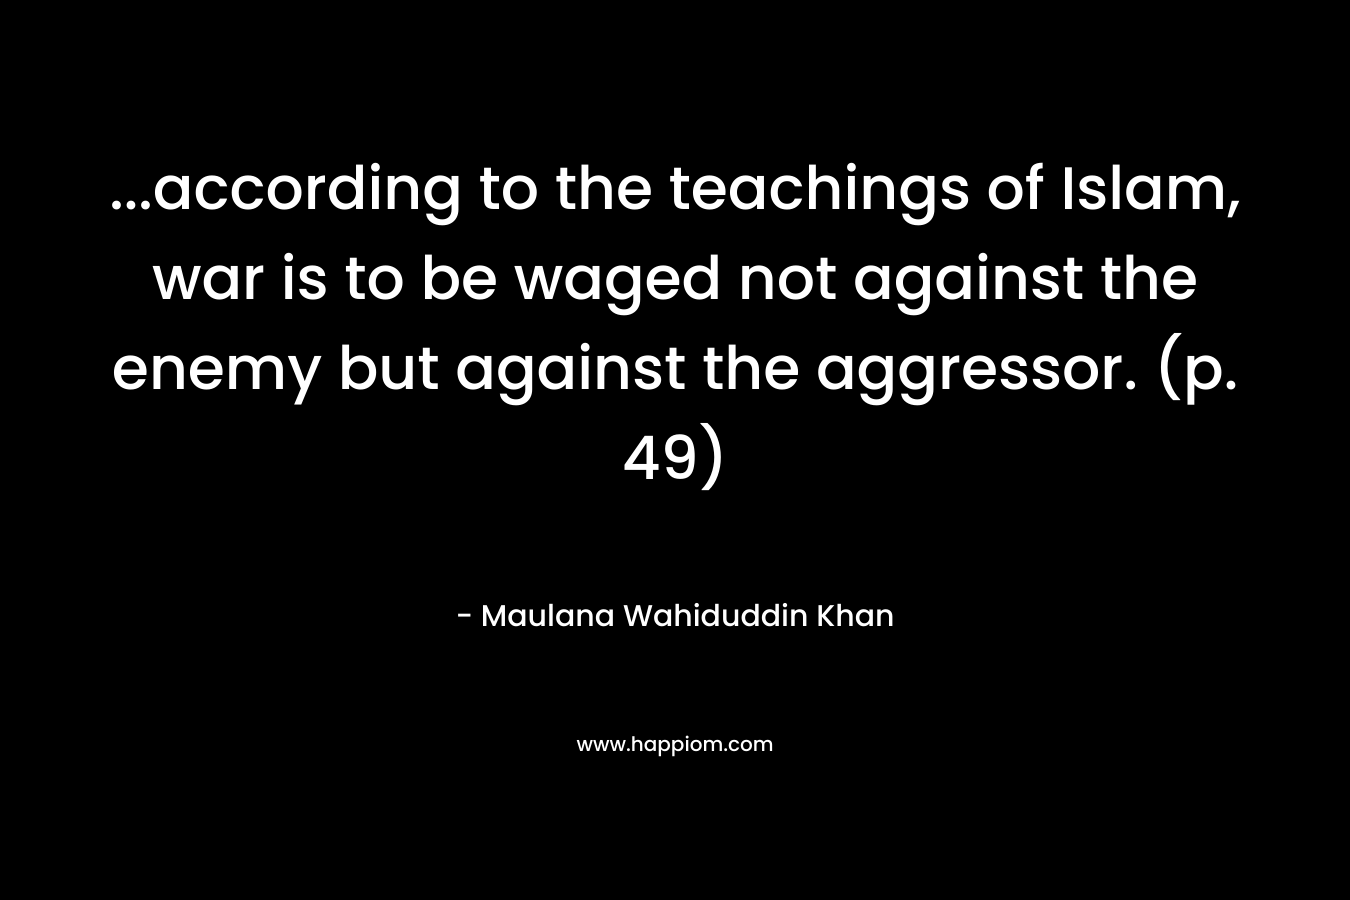 ...according to the teachings of Islam, war is to be waged not against the enemy but against the aggressor. (p. 49)